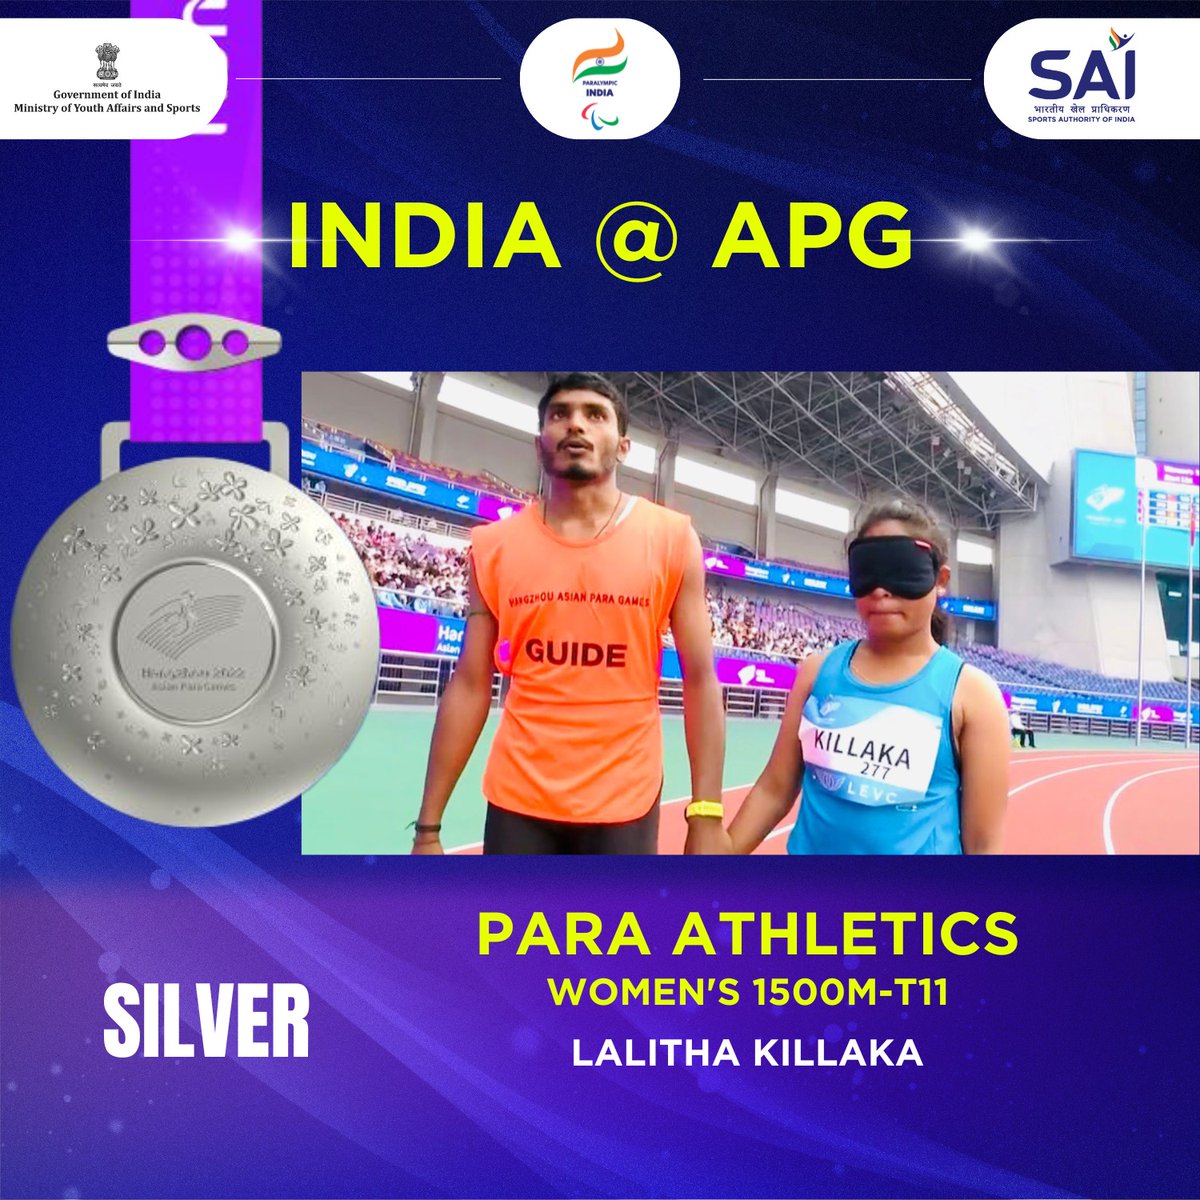 🇮🇳 at the TOP🔝in Women's 1500m-T11 Event at #AsianParaGames2022 🥳

Rakshitha Raju & Lalitha Killaka win a🥇& 🥈each by clocking 5:21.45 & 5:48. 85 respectively!

Many congratulations to both the champions! Well done girls💪🏻👏

#Cheer4India
#Praise4Para
#JeetegaBharat
#HallaBol